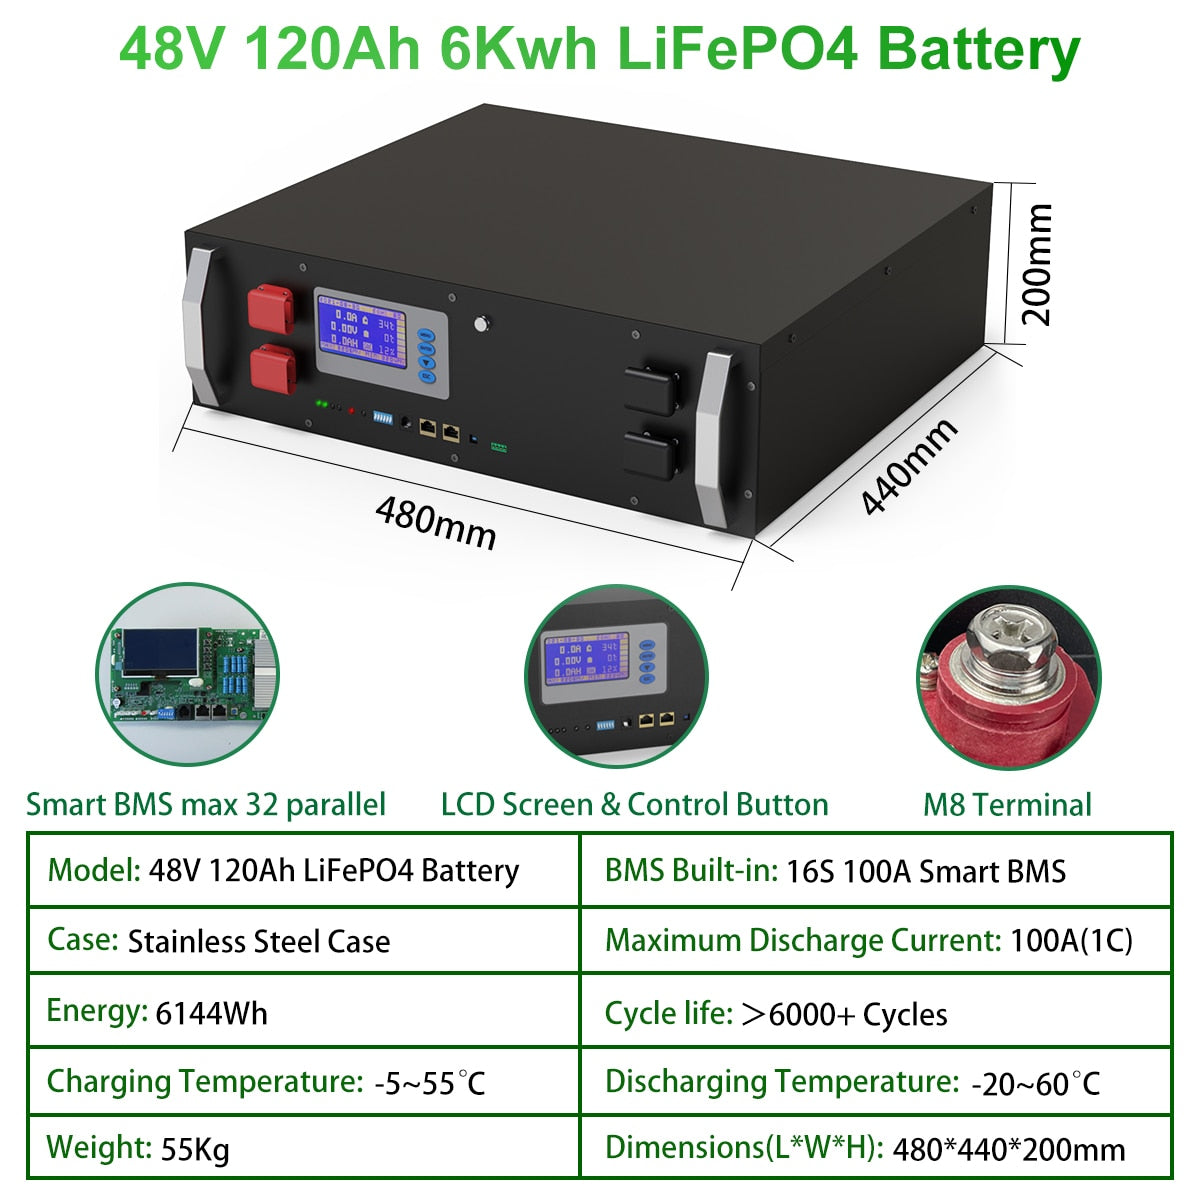 Pacco batteria LiFePO4 48V 300Ah 200Ah 100Ah - 15Kw 6000 cicli 16S BMS 51.2V RS485/CAN Controllo PC Off/On Grid Accumulatore solare